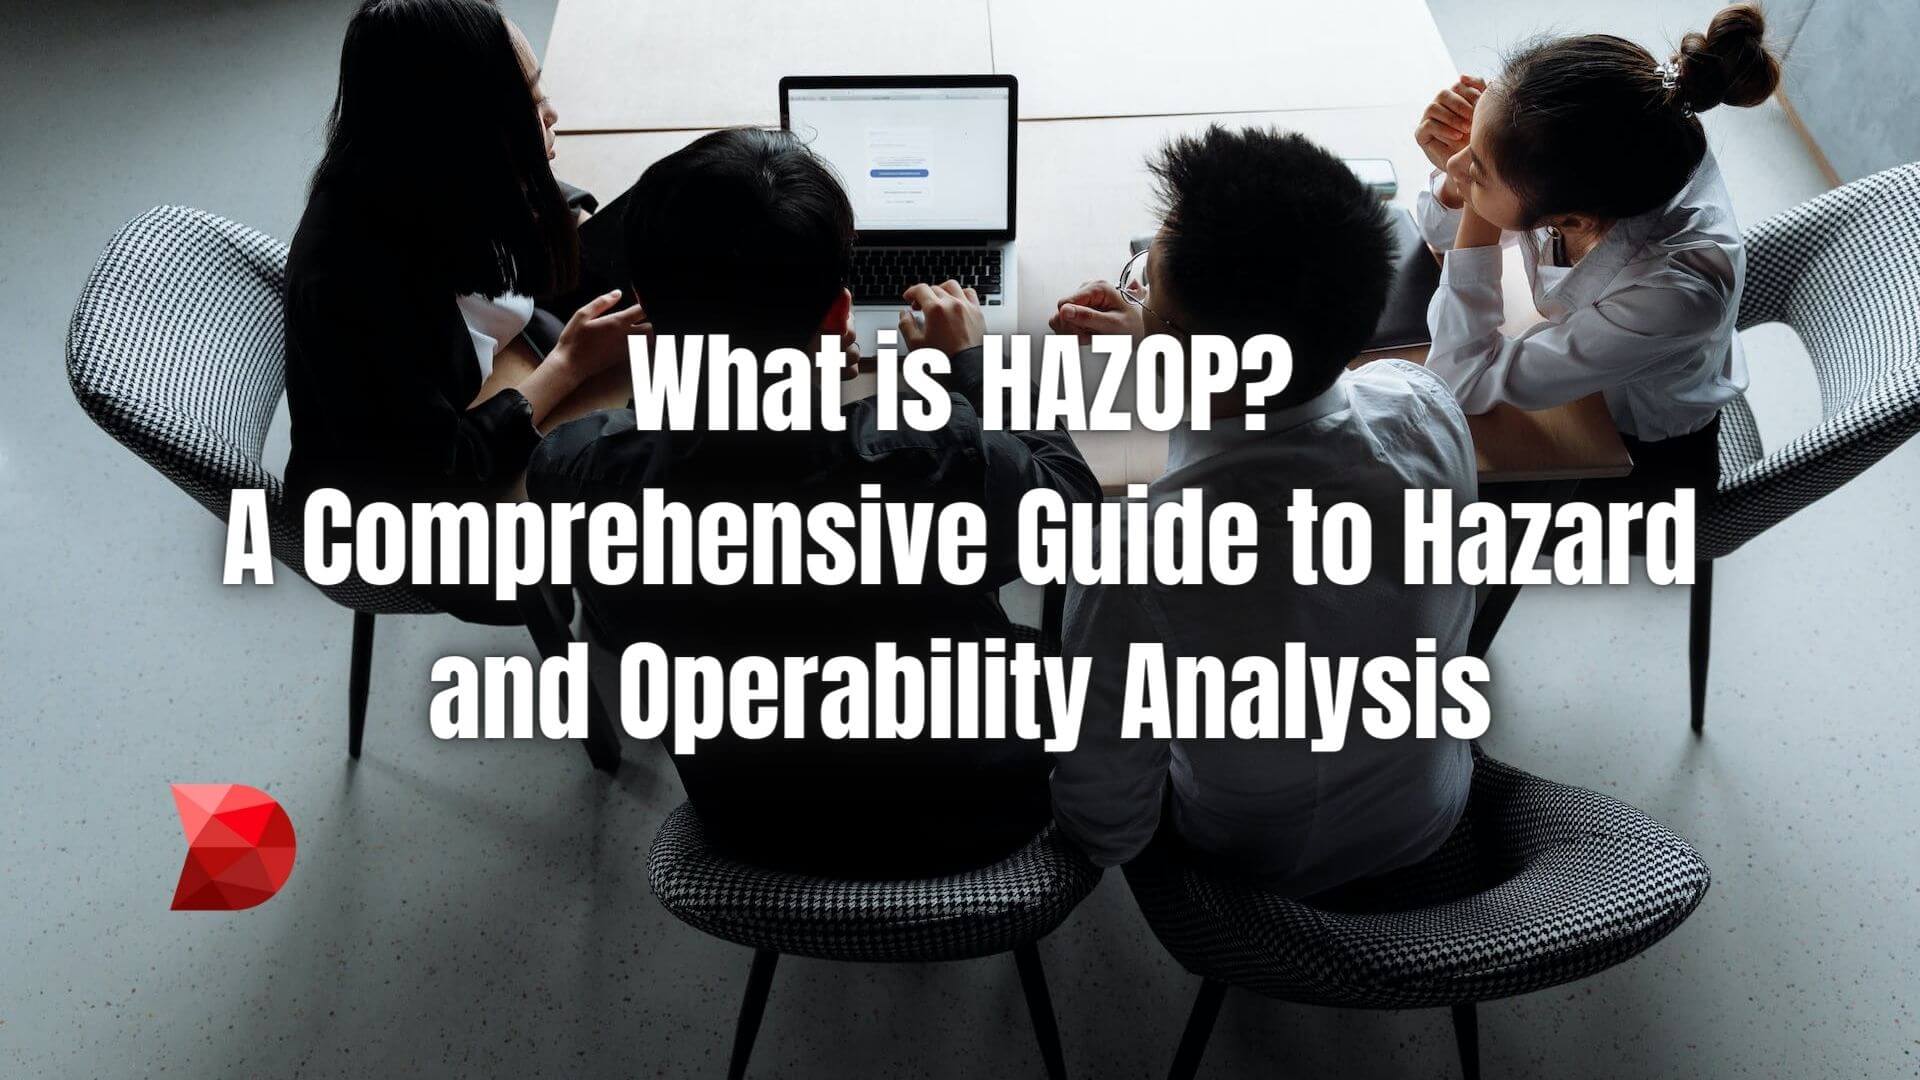 Master Hazard and Operability Analysis (HAZOP) with this comprehensive guide. Click here to understand the risks and ensure safety.